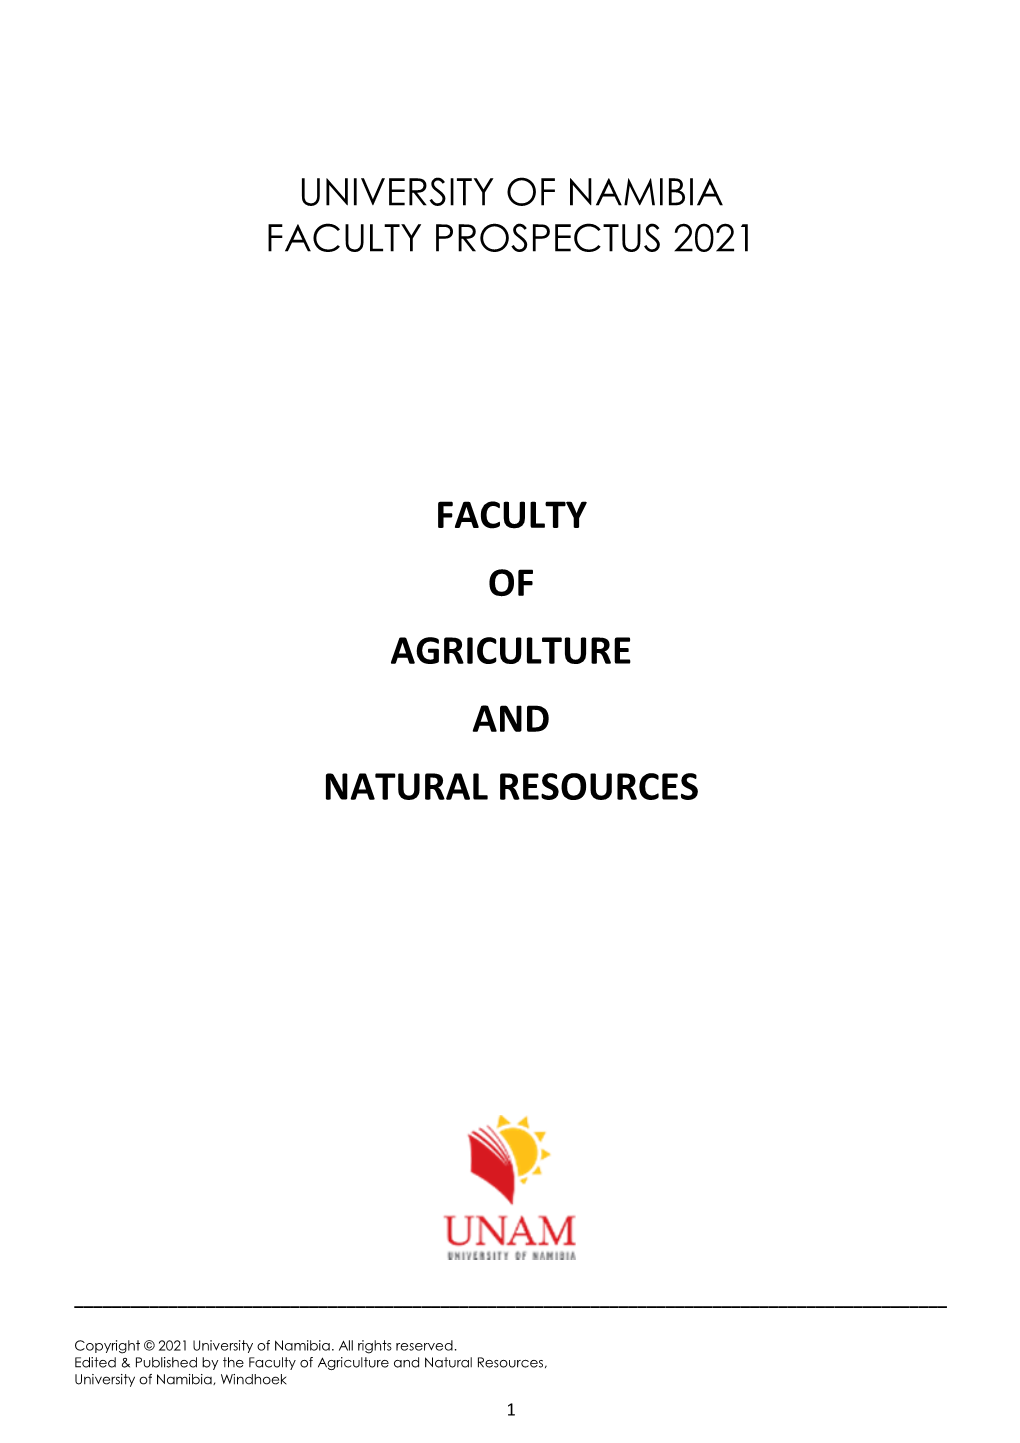 Faculty of Agriculture and Natural Resources